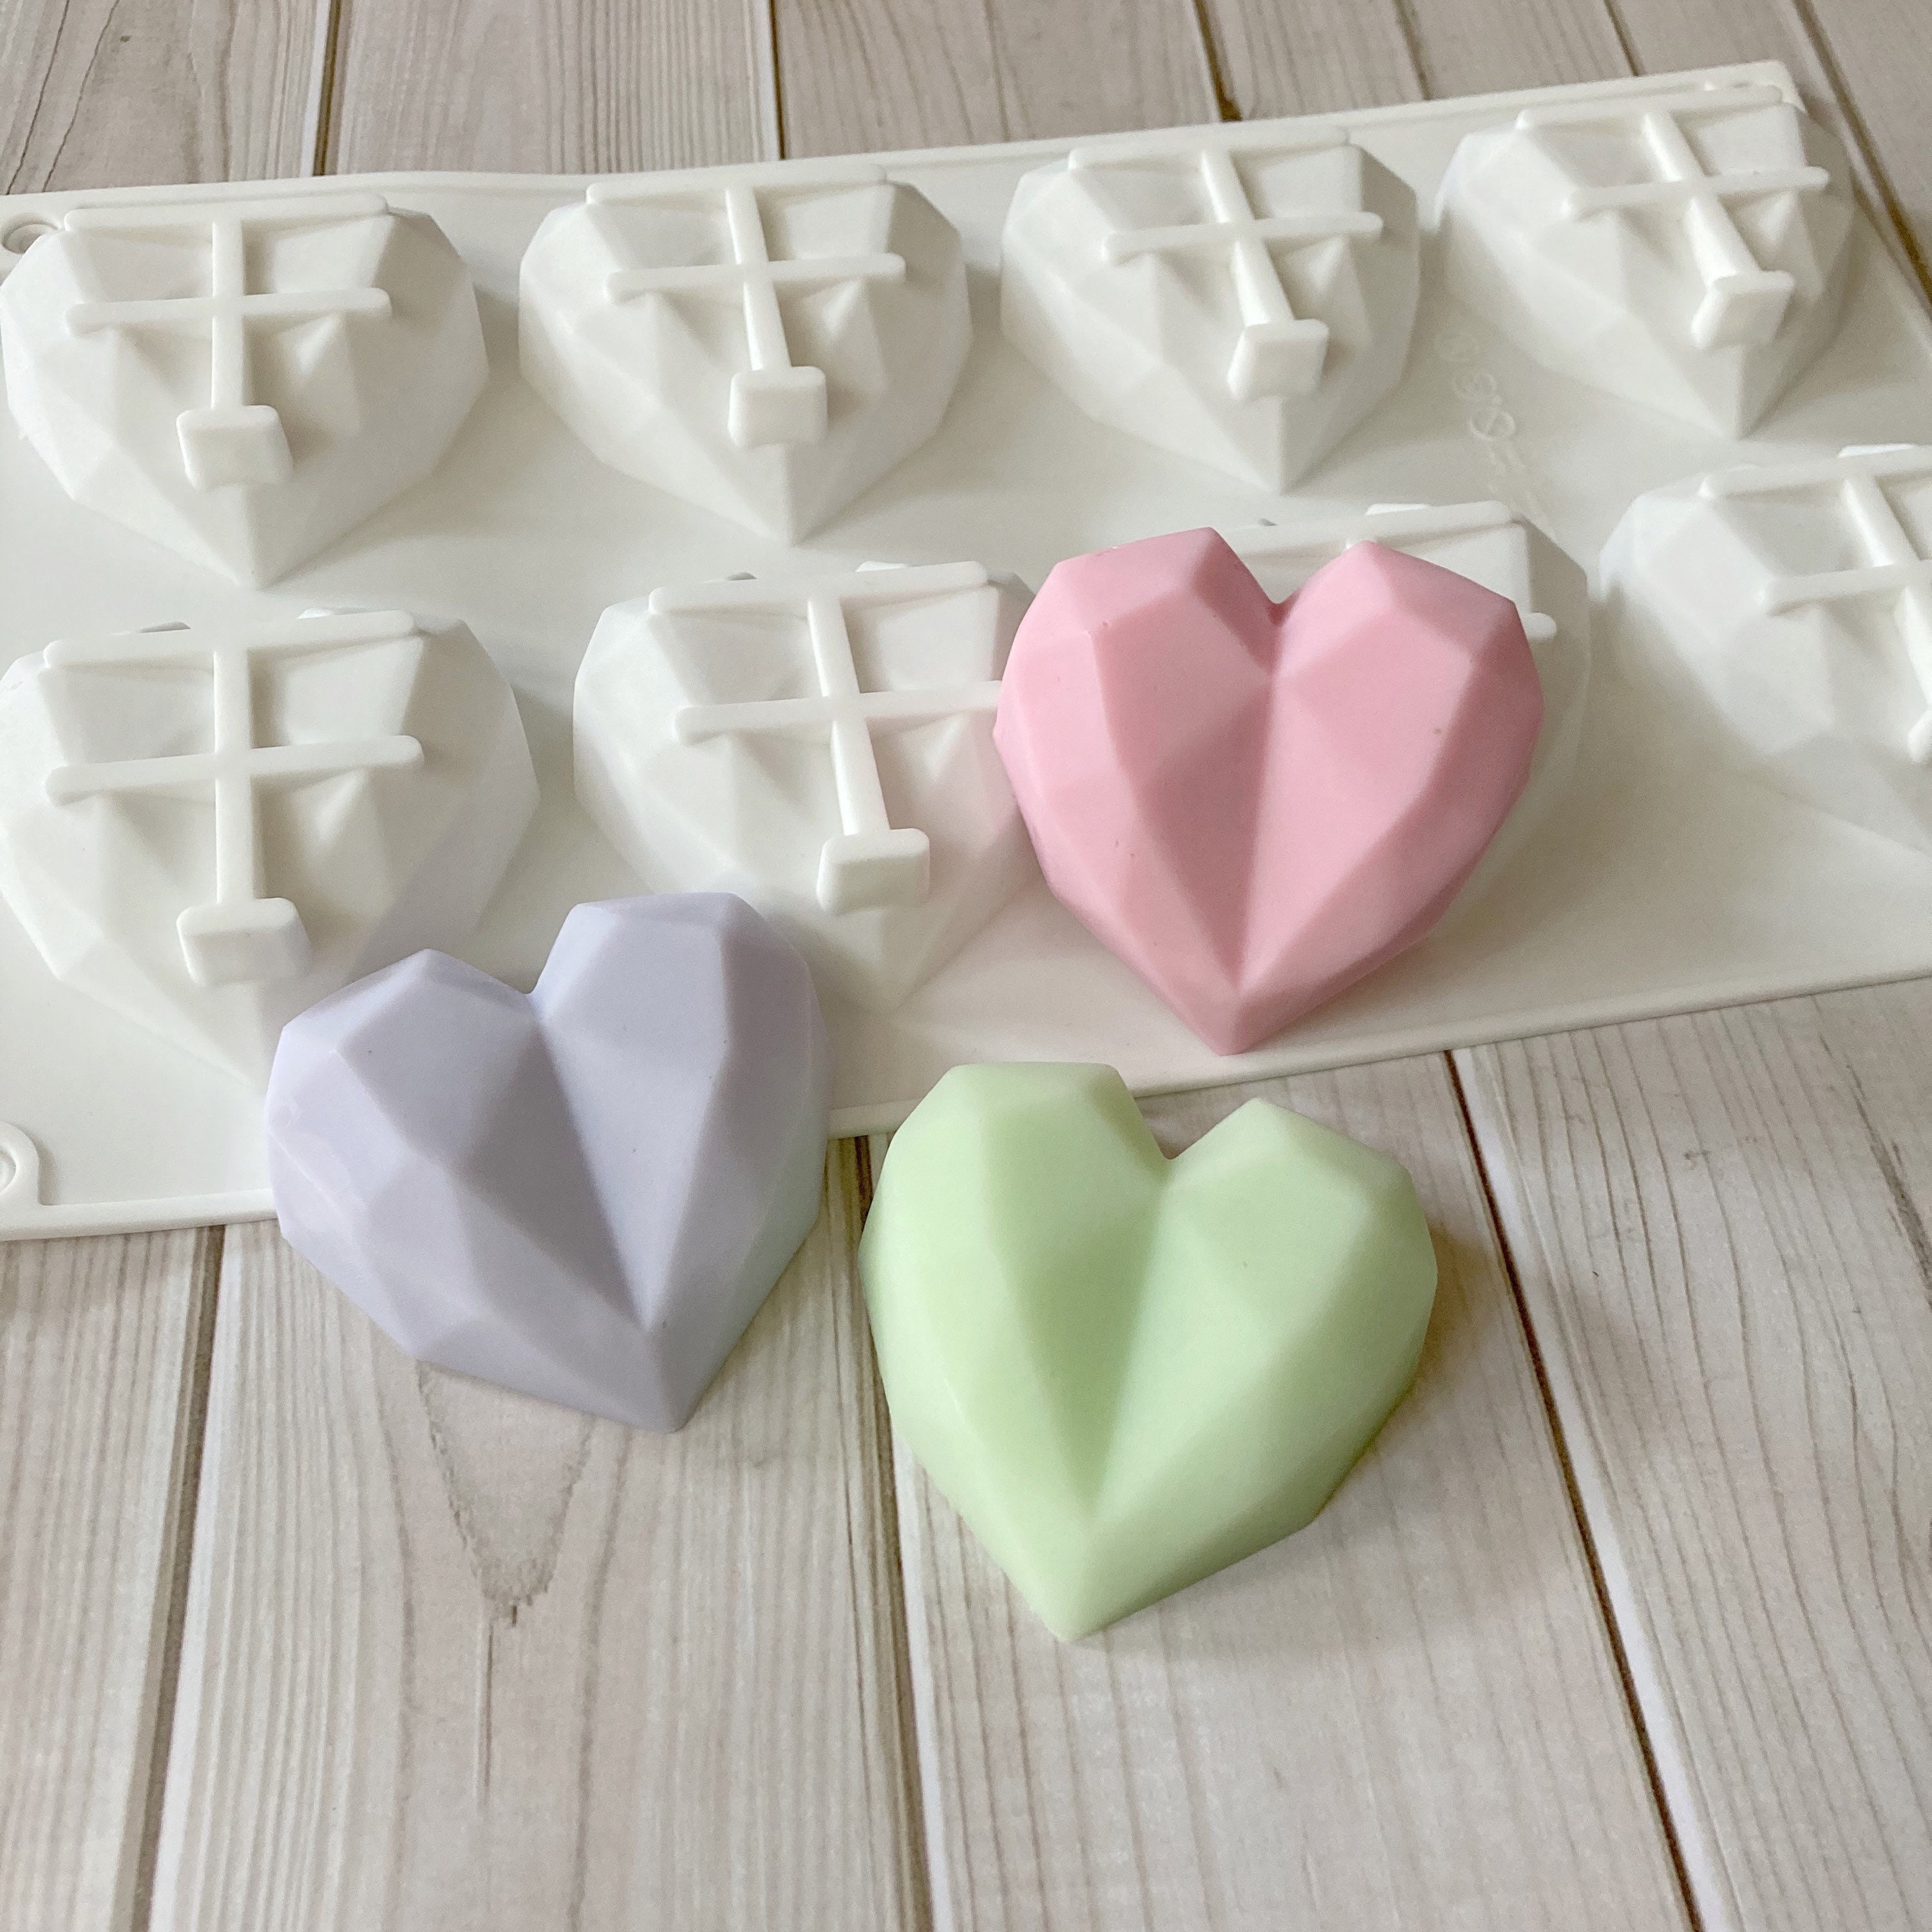 R1030 Valentines Lover Kiss Heart Shape Handmade Custom DIY Silicone Molds  for Soap, Chocolate, Soap Holder, Ashtray Making - China Silicone Molds, Valentines  Silicone Molds